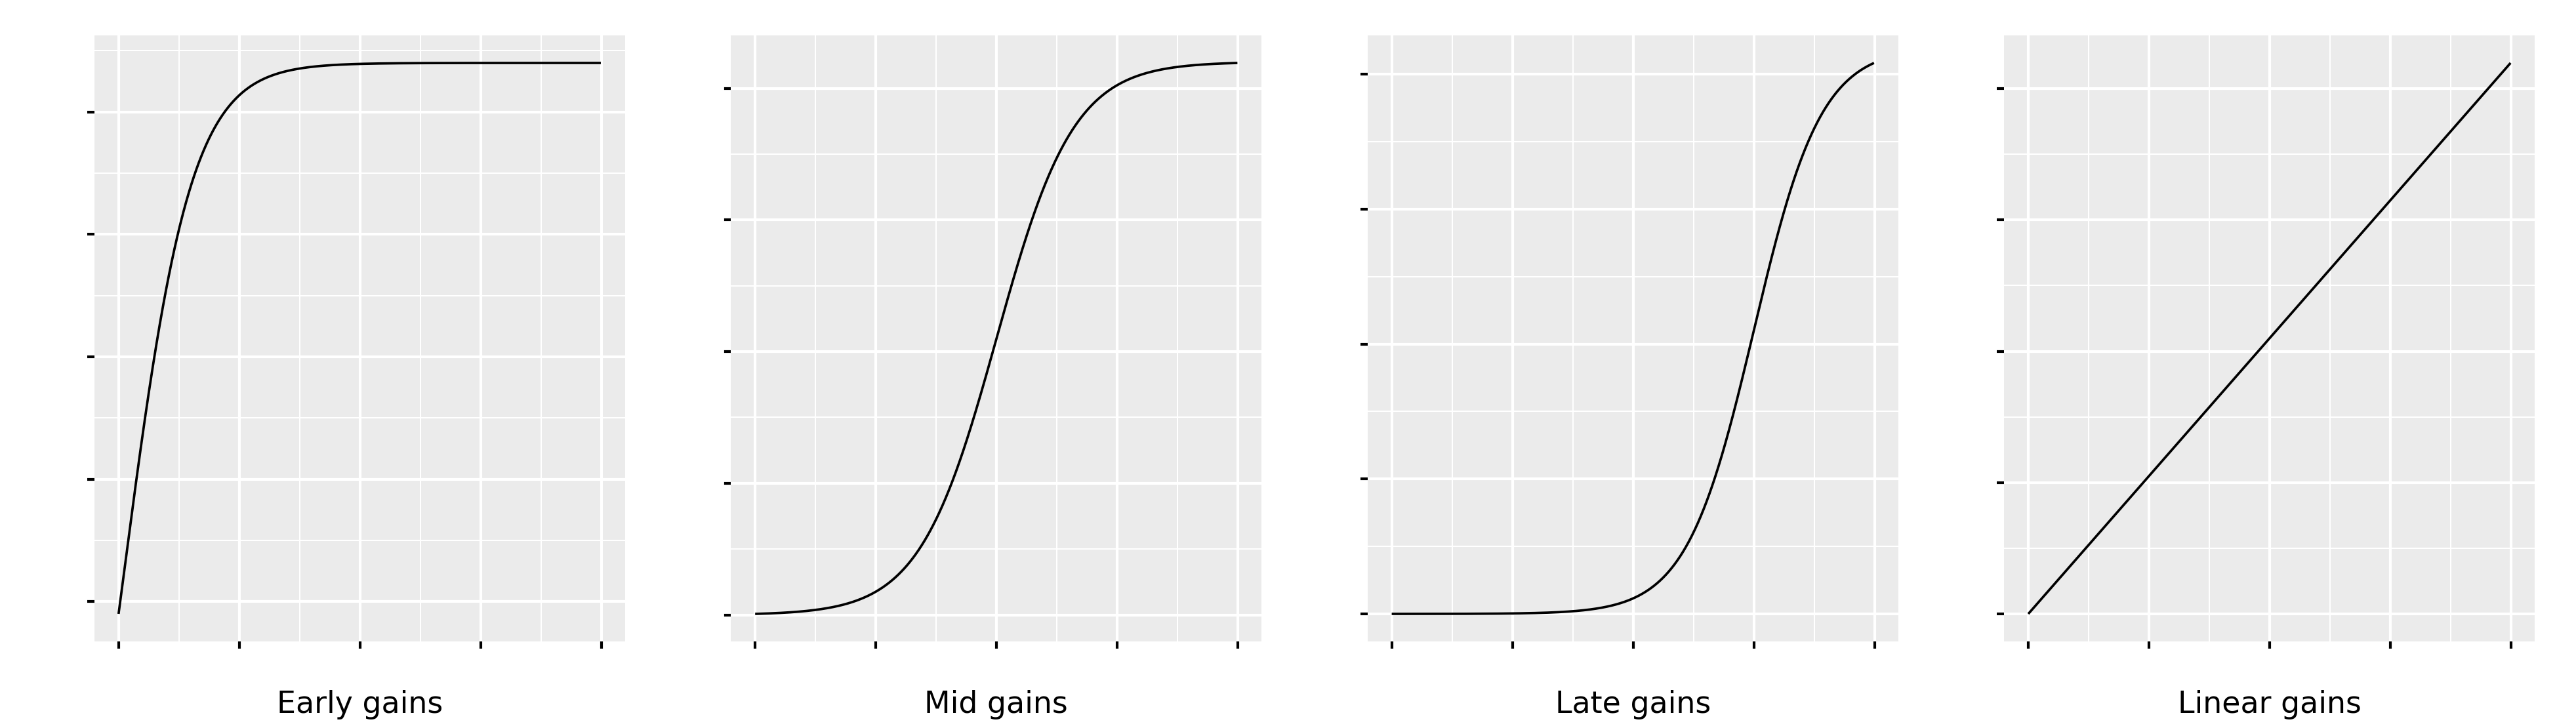 figures/ELV_as_function_of_stats_hours.png